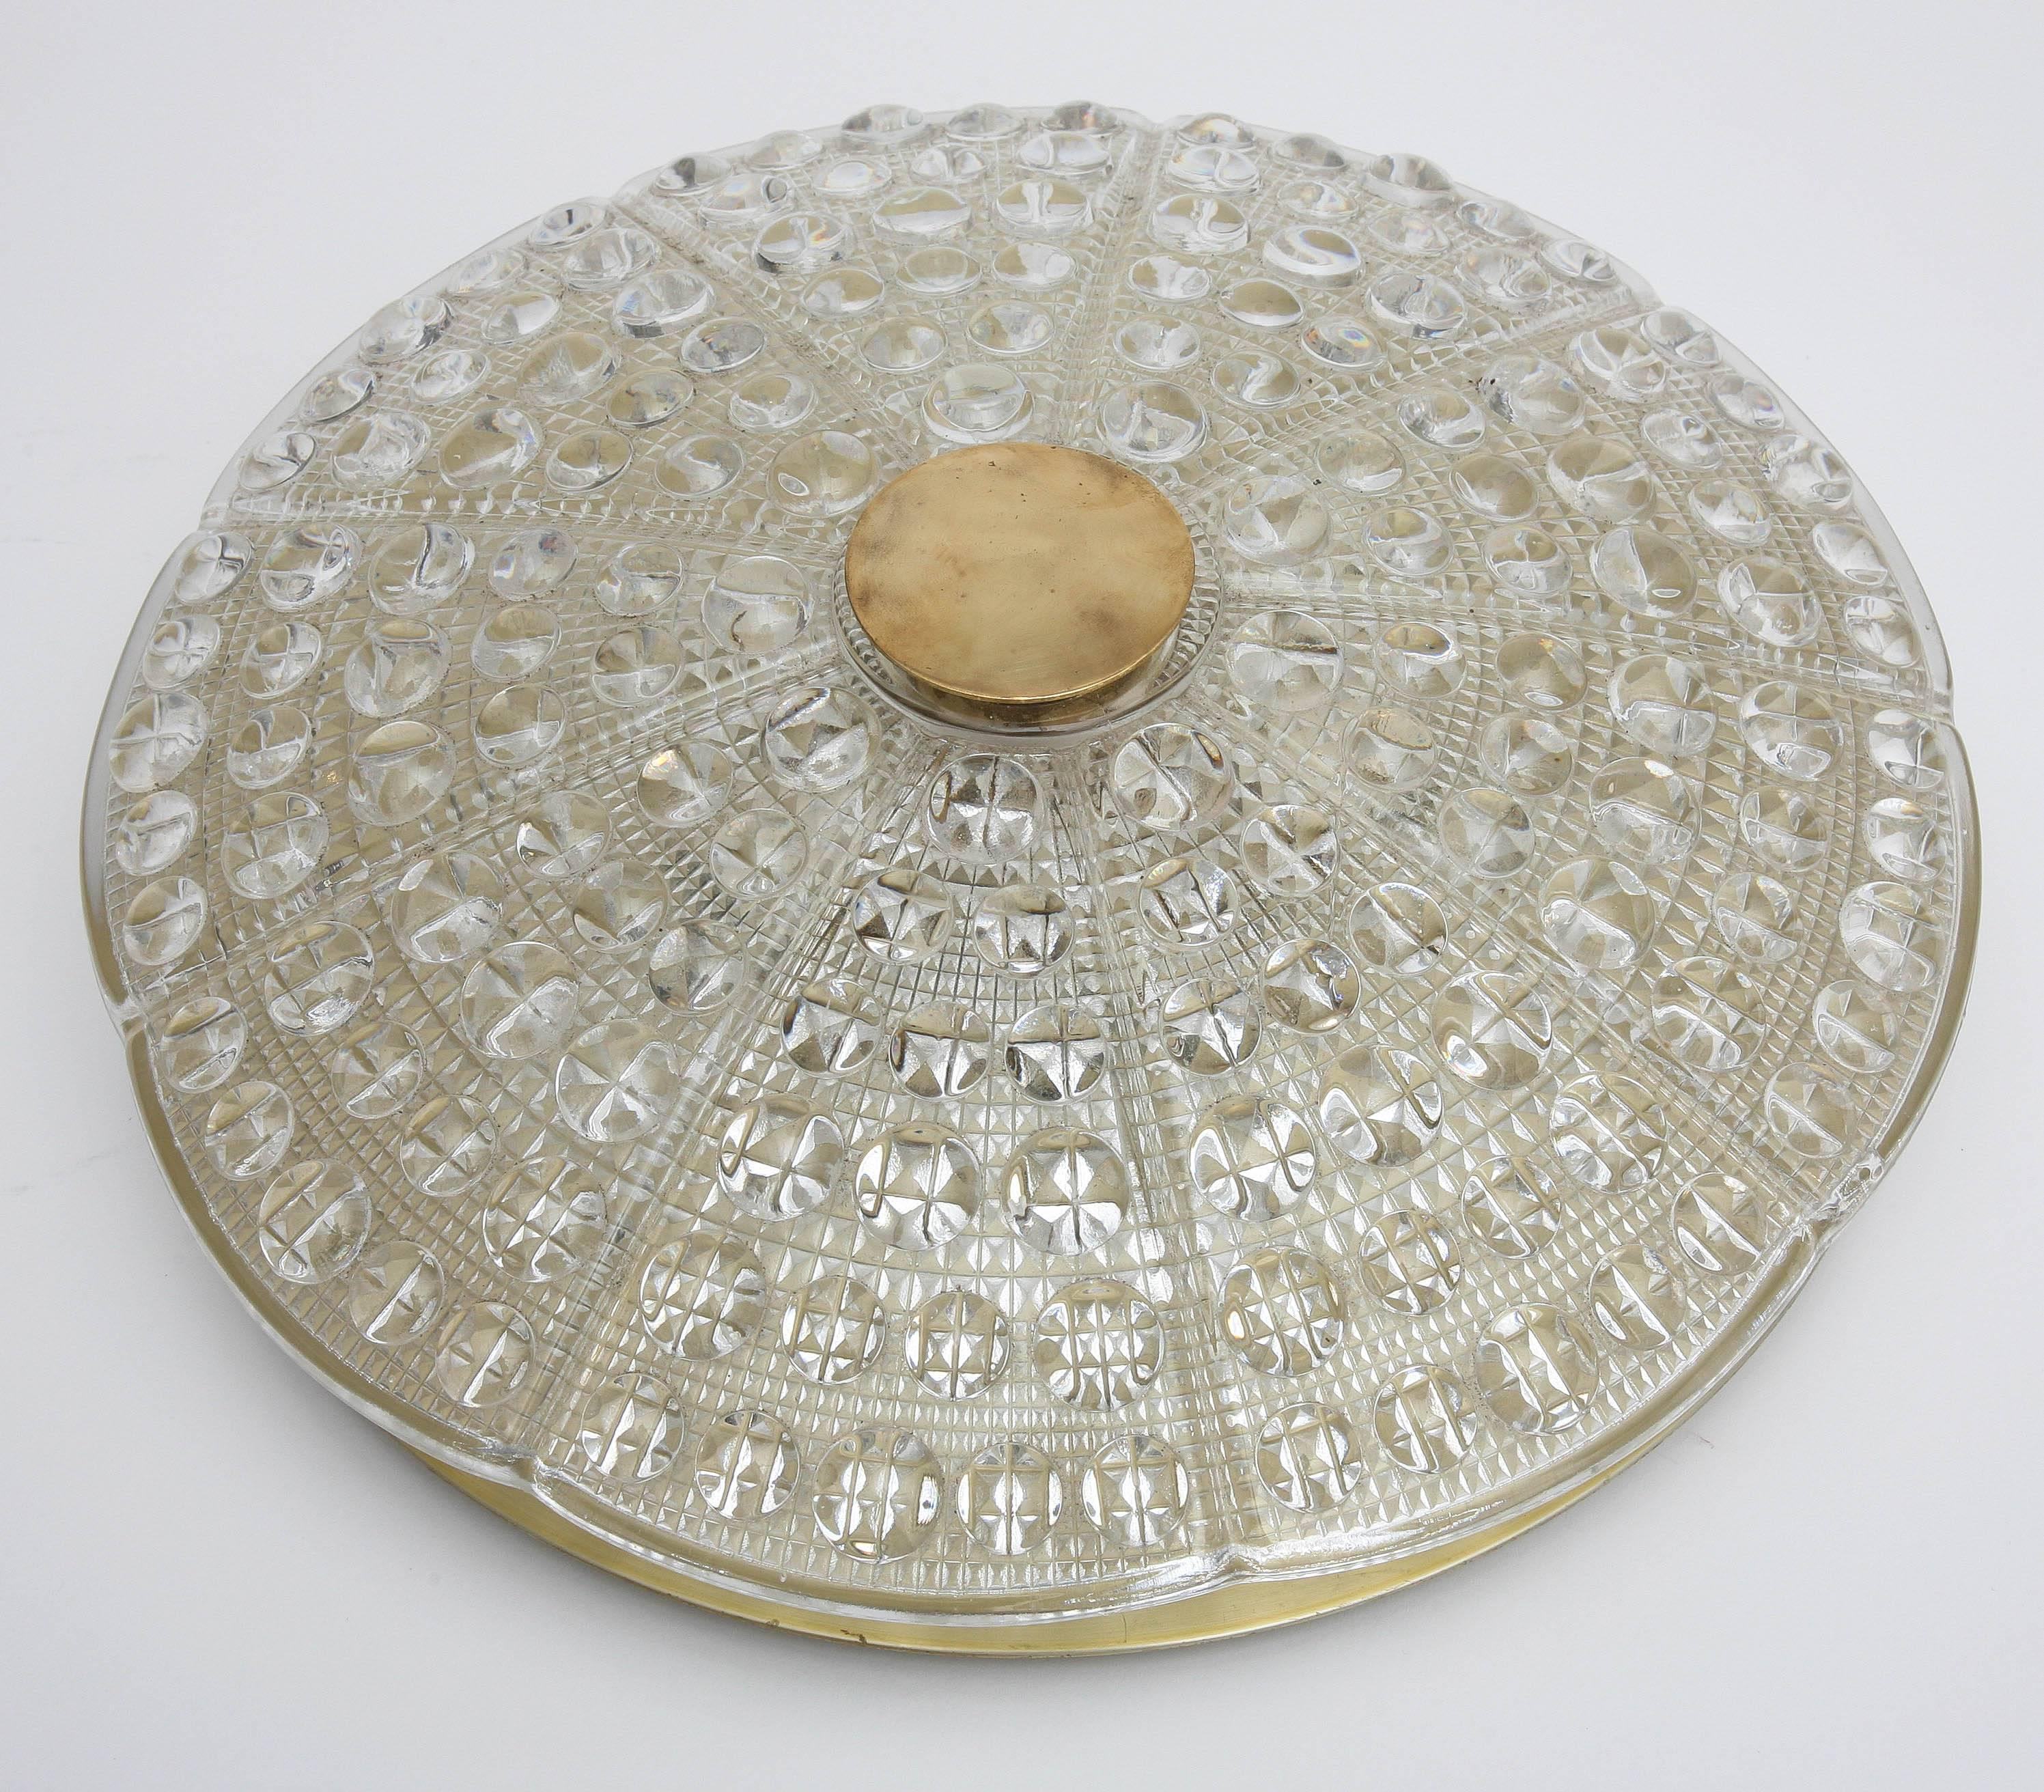 One Orrefors crystal and brass flush mount light fixture by Carl Fagerlund,
Swedish, 1960s The crystal cover has circular raised pattern with a diamond
textured pattern on the bottom, fixture takes six candelabra bulbs, brass backplate and round